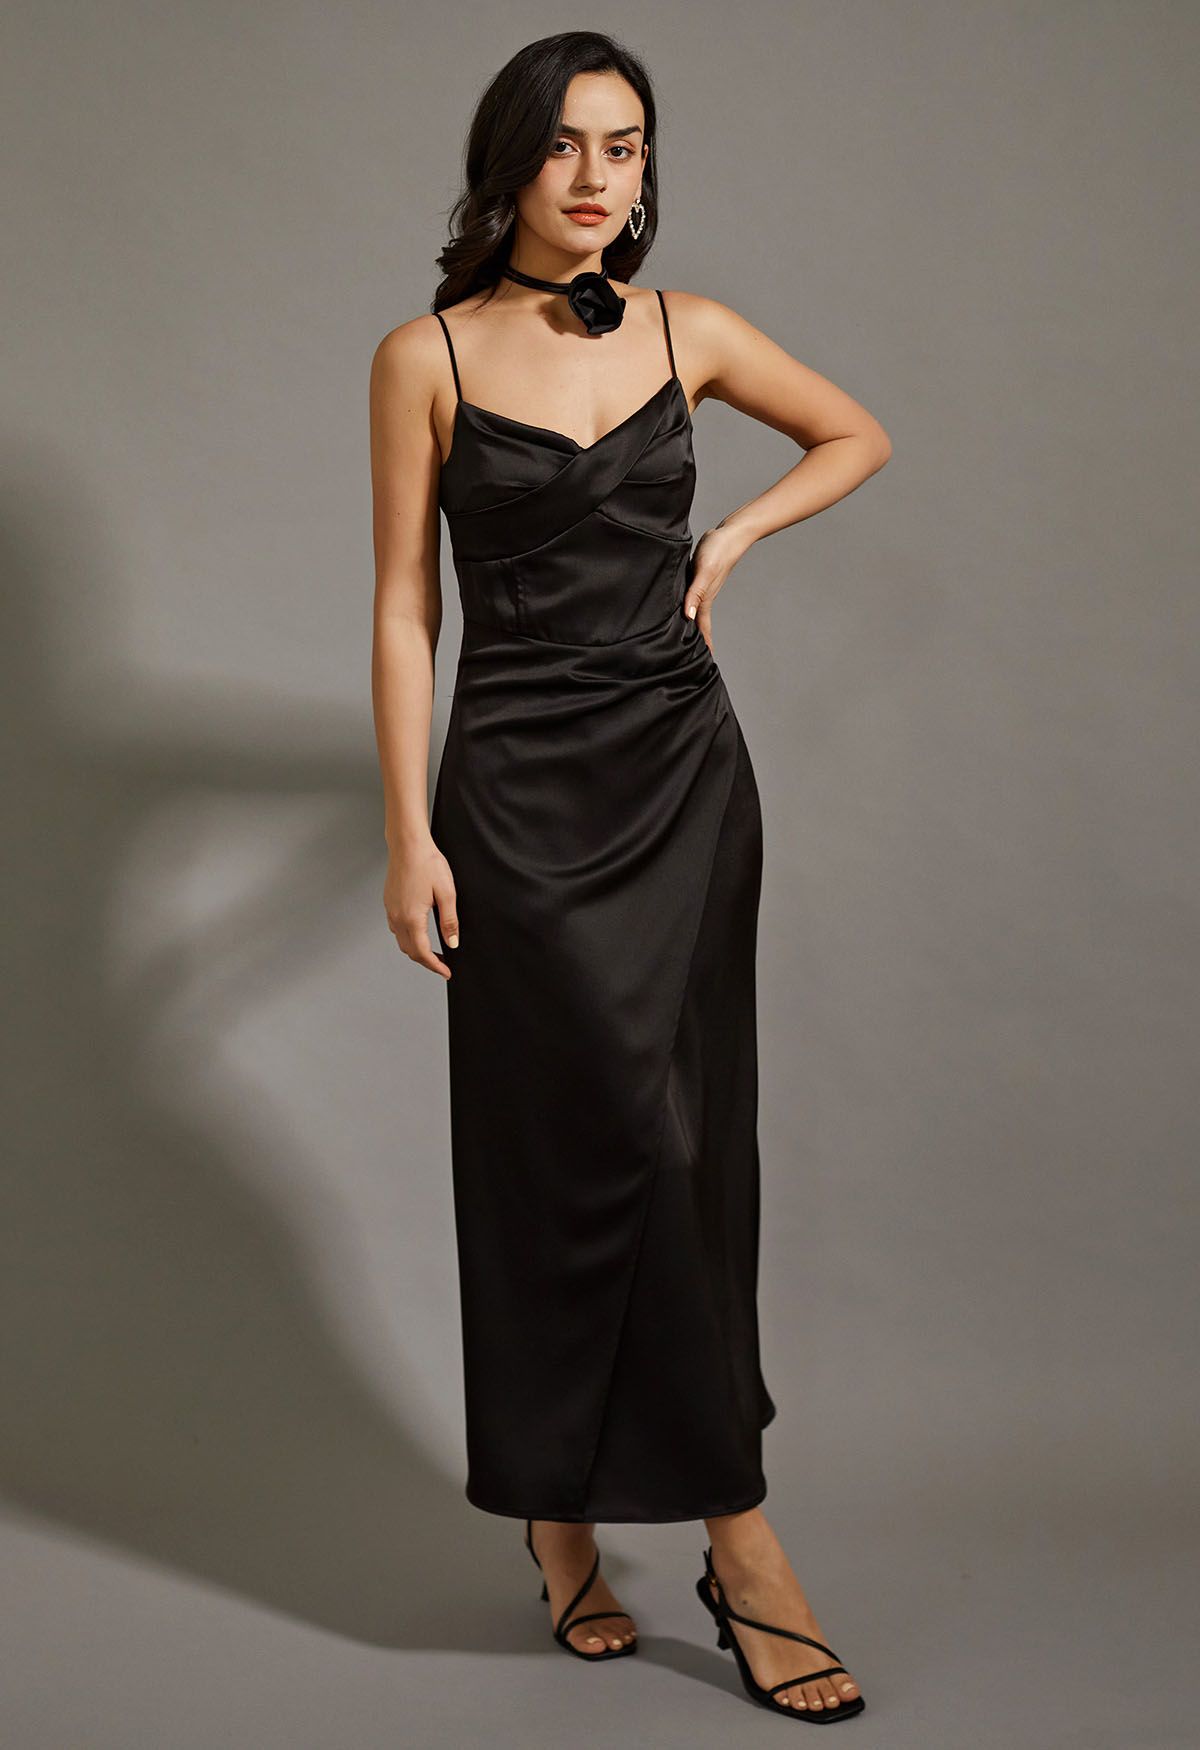 Floral Choker Satin Cami Maxi Dress in Black - Retro, Indie and